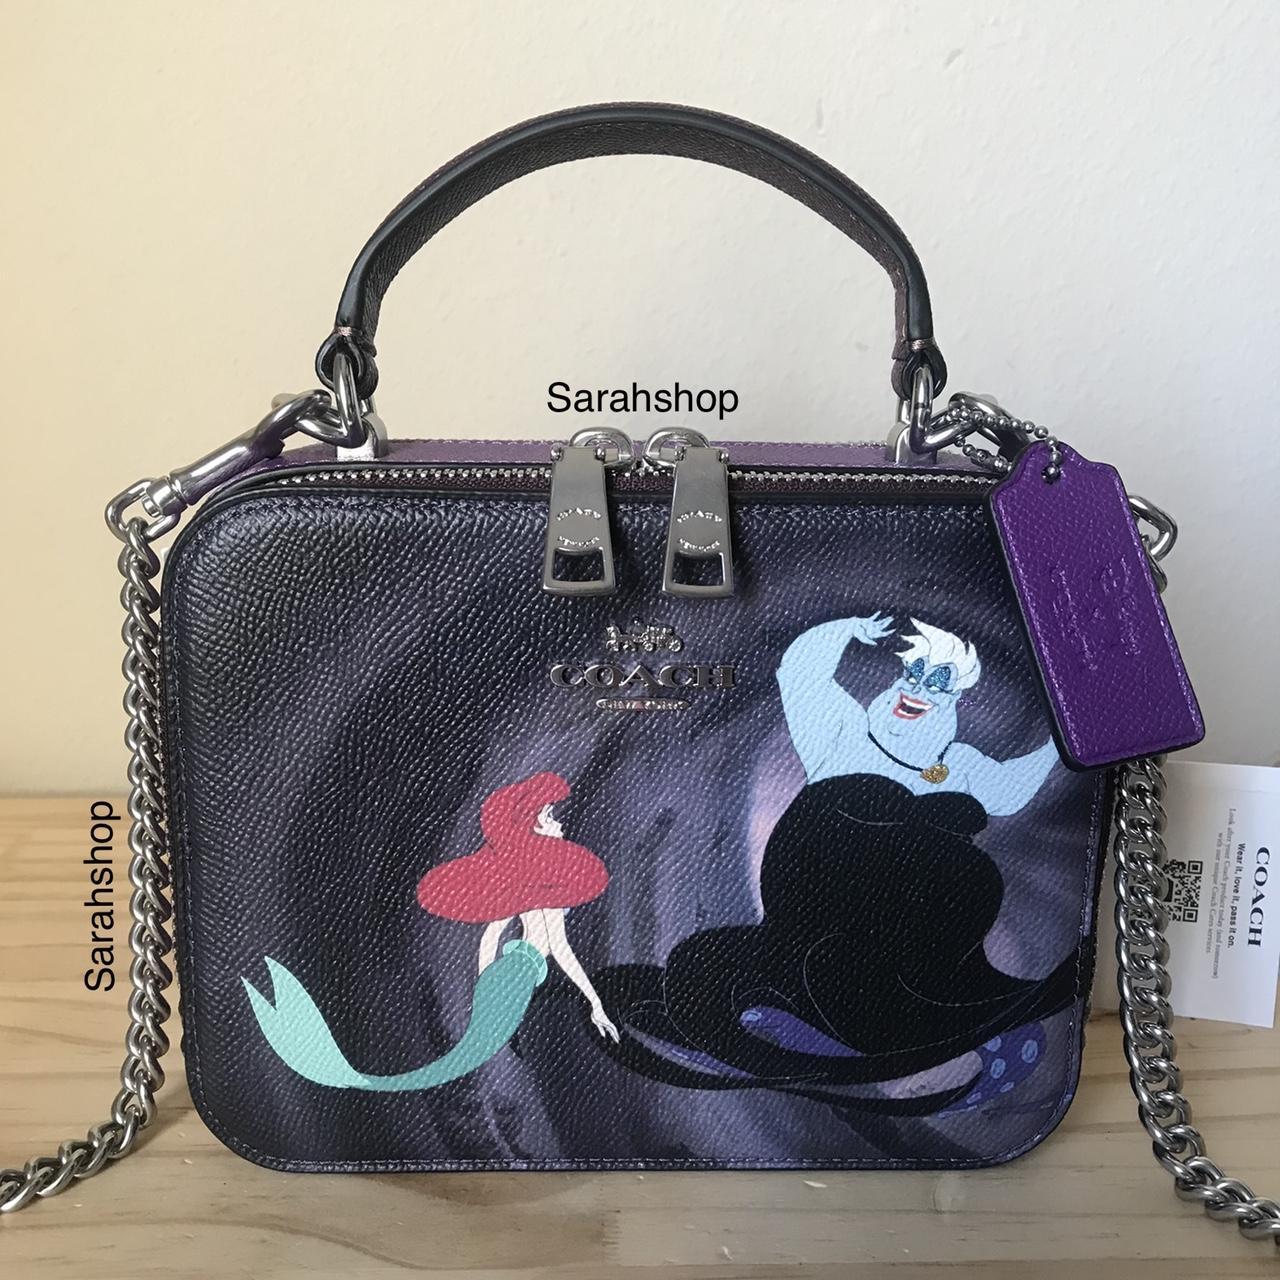 Authentic, Brand new with tags Coach Disney - Depop